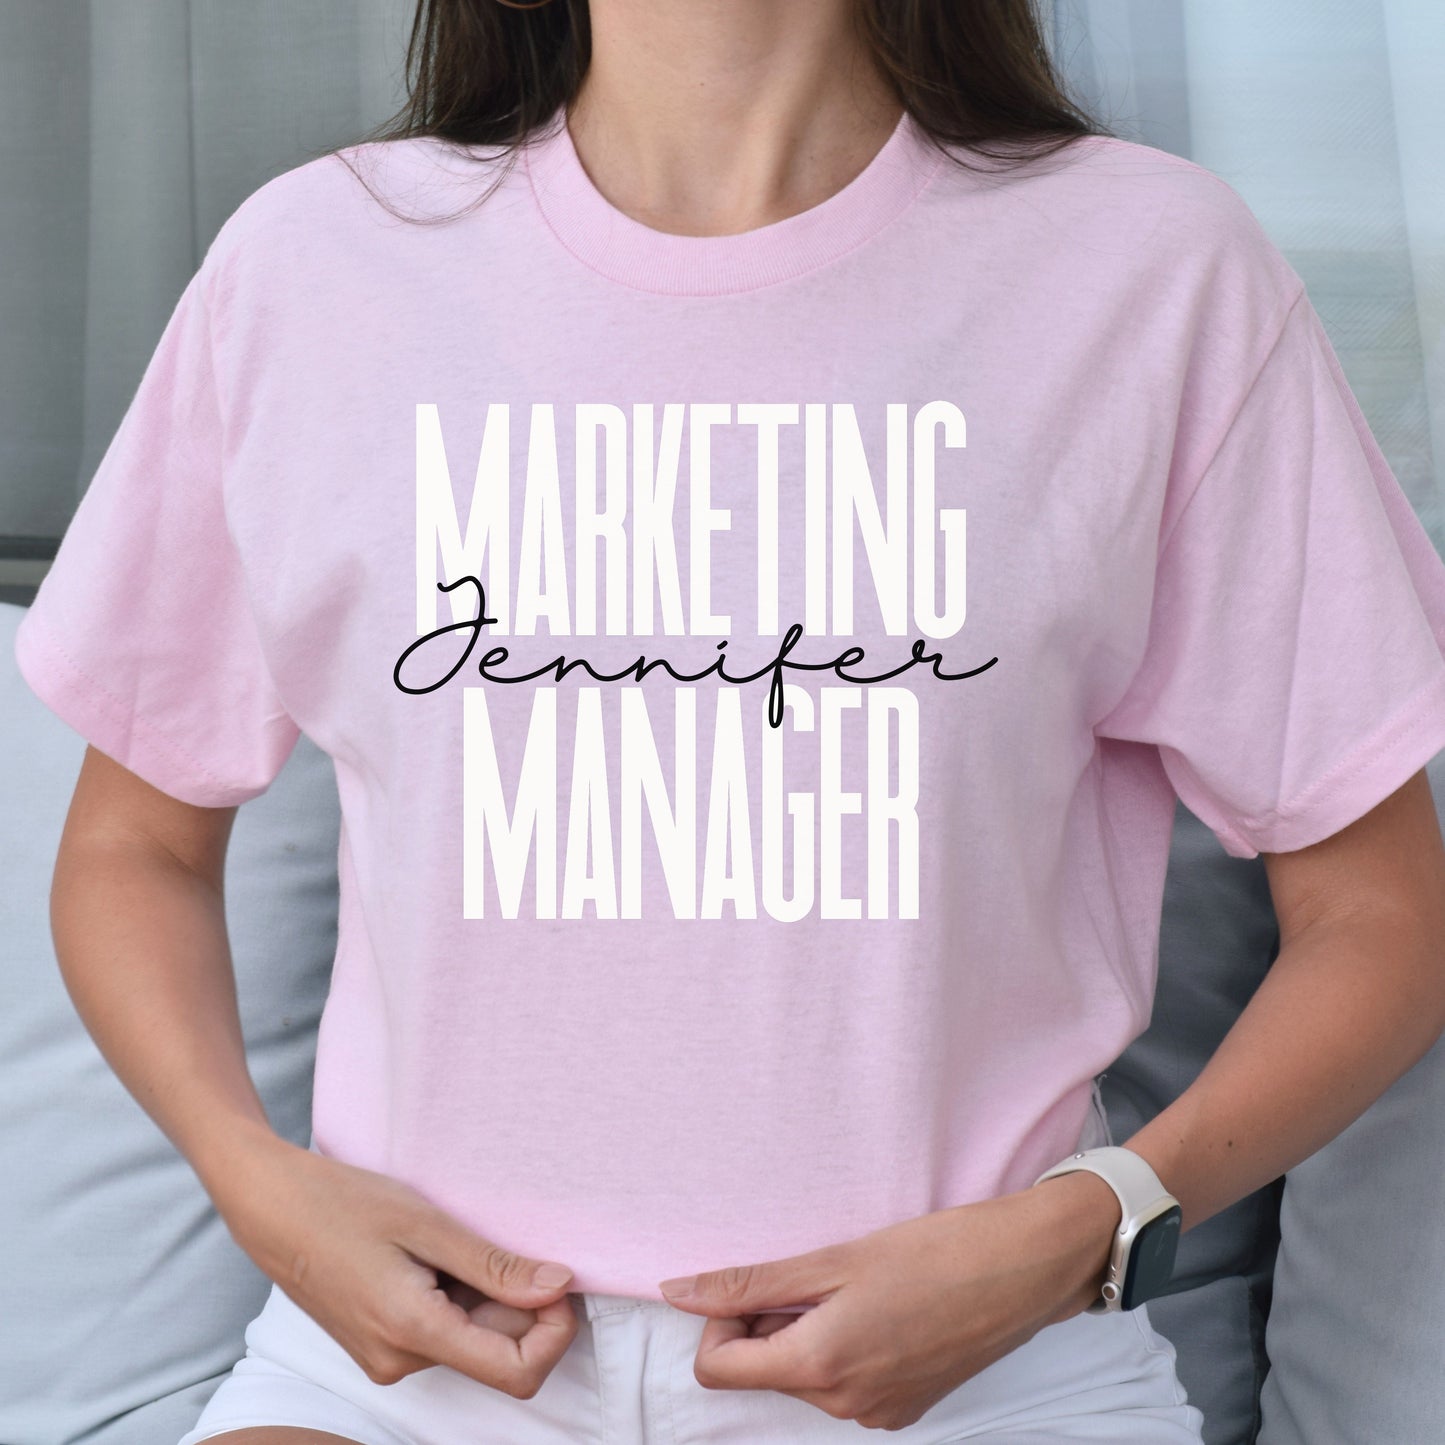 Personalized T-Shirt gift Marketing Manager Custom name Social Media Marketer Unisex Tee Sand Pink Blue-Light Pink-Family-Gift-Planet